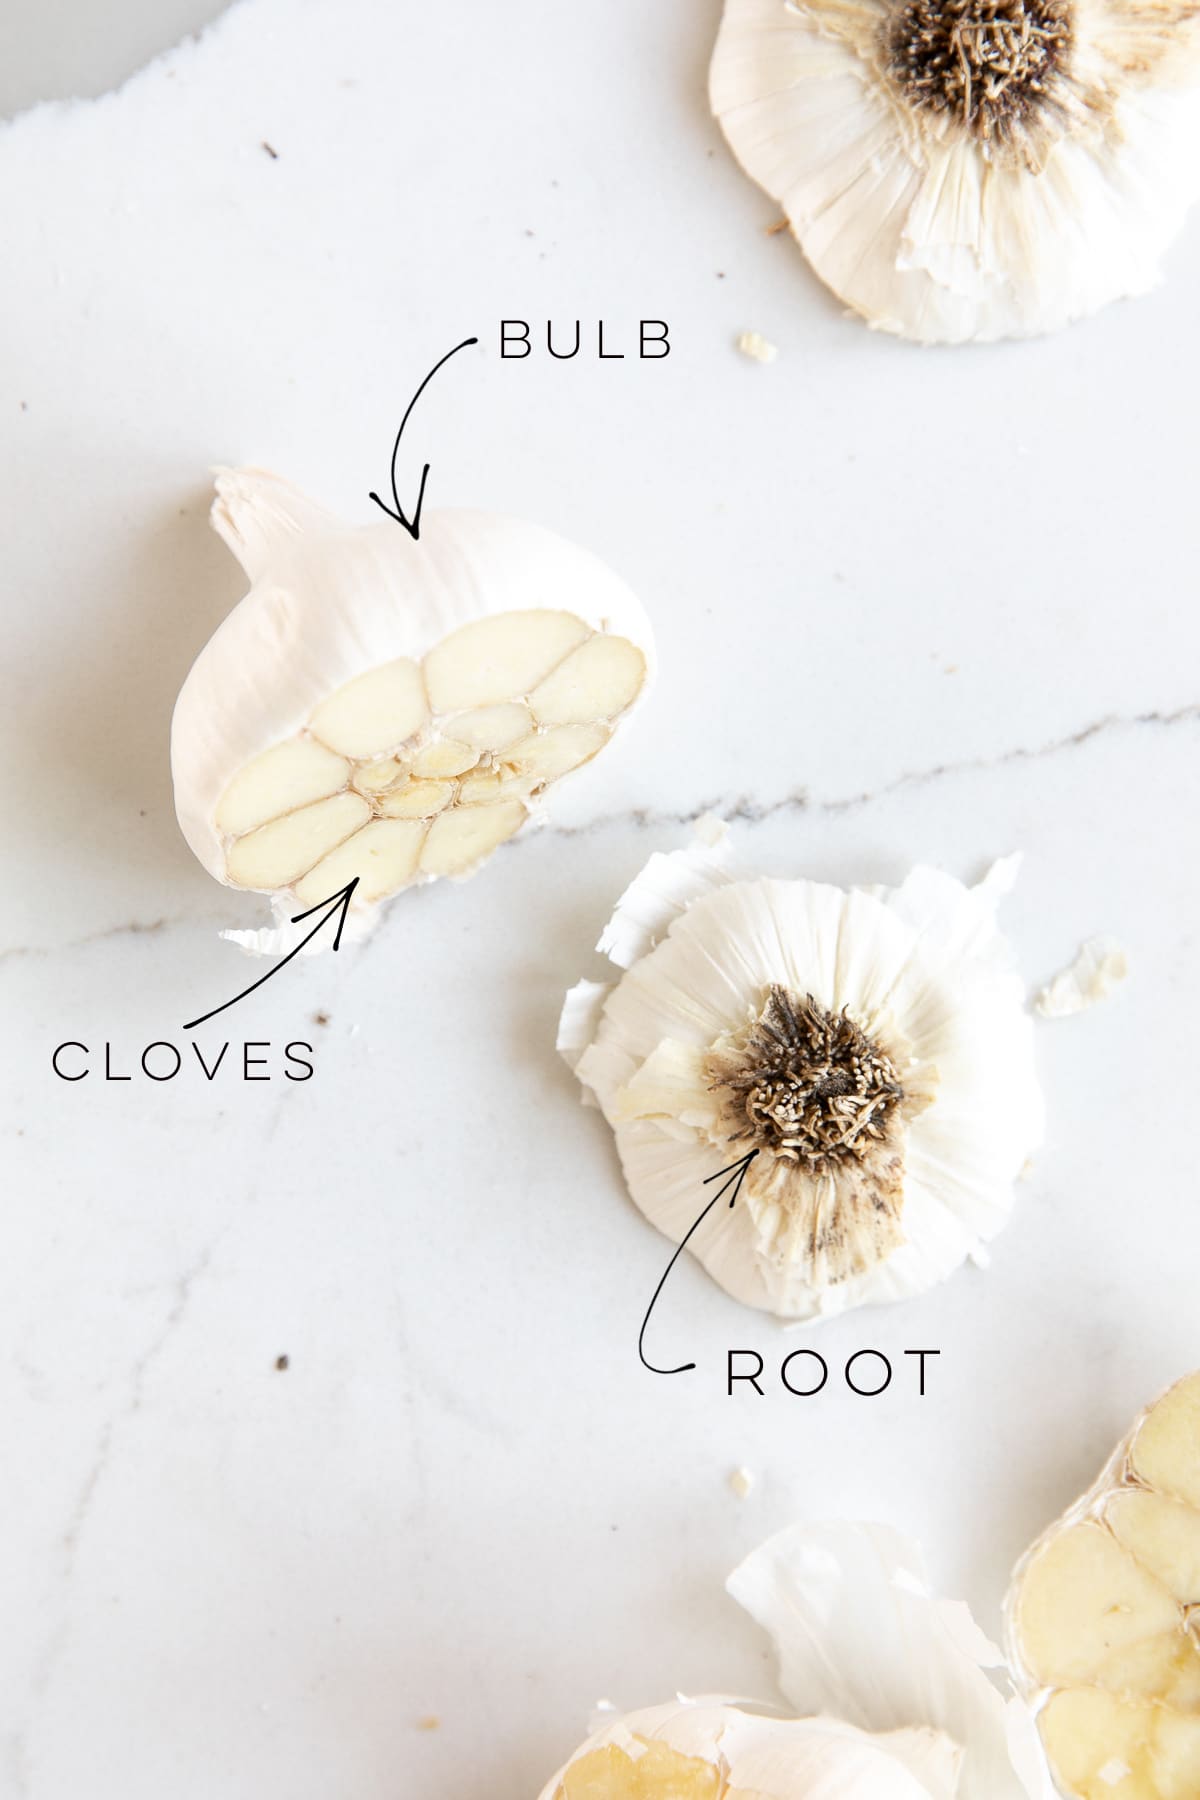 Image of a bulb of garlic with the room cut off to show the cloves inside.